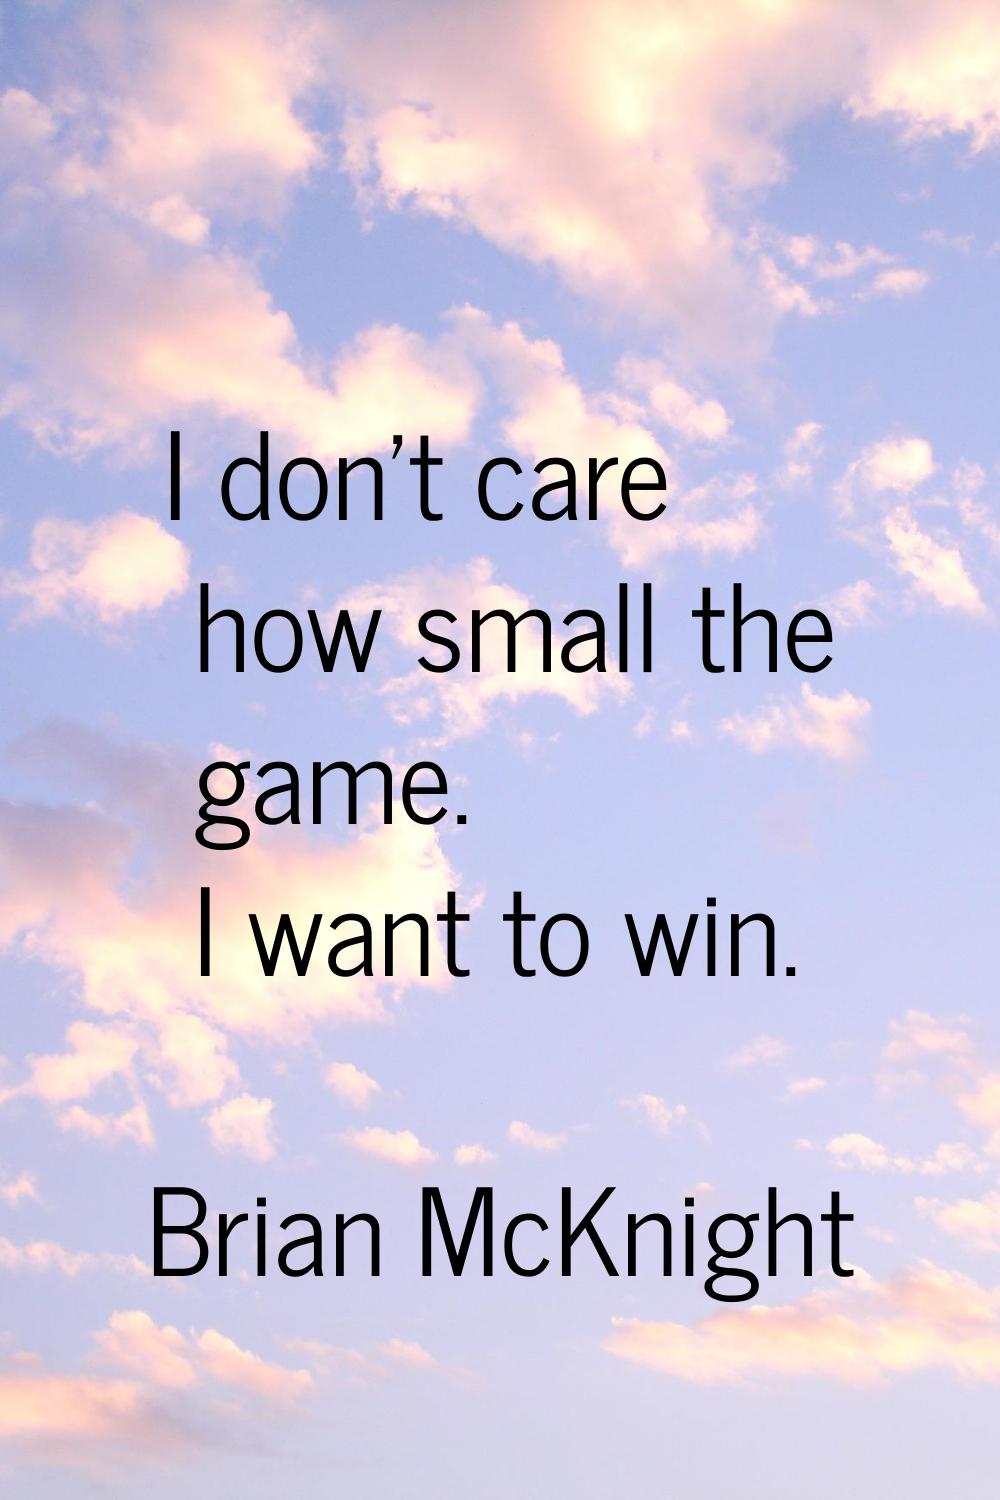 I don't care how small the game. I want to win.